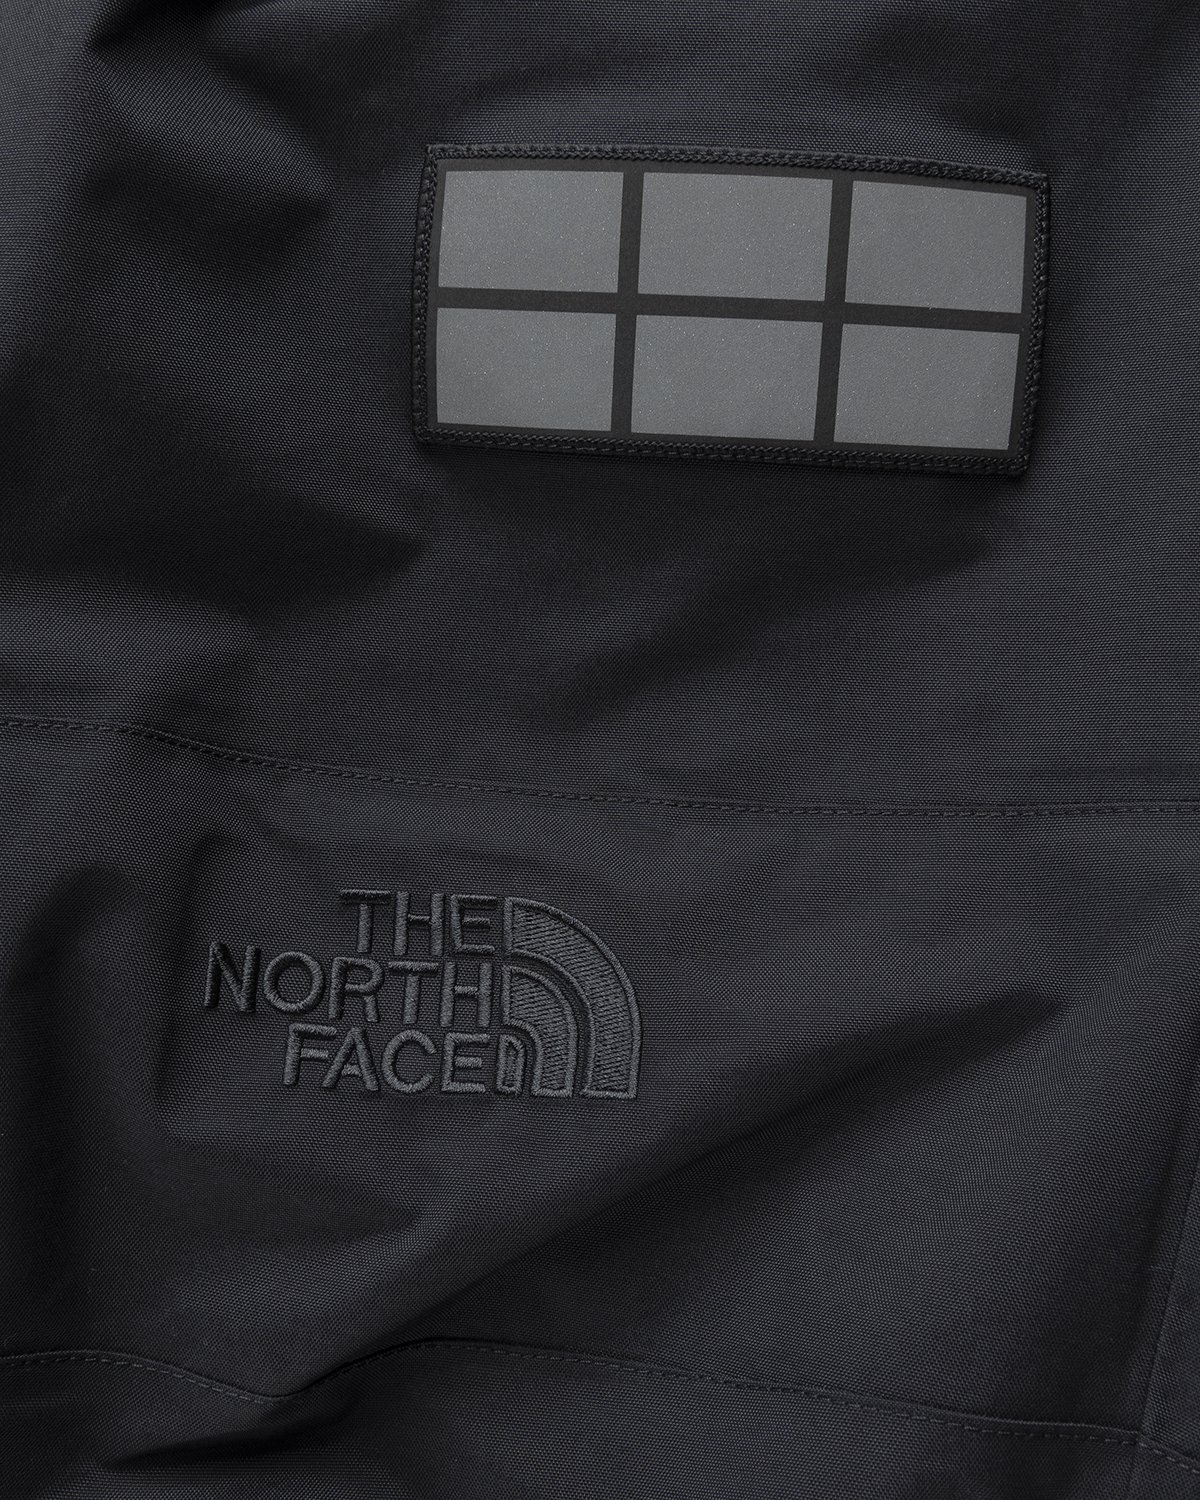 The North Face - Trans Antarctica Expedition Pant Black - Clothing - Black - Image 5